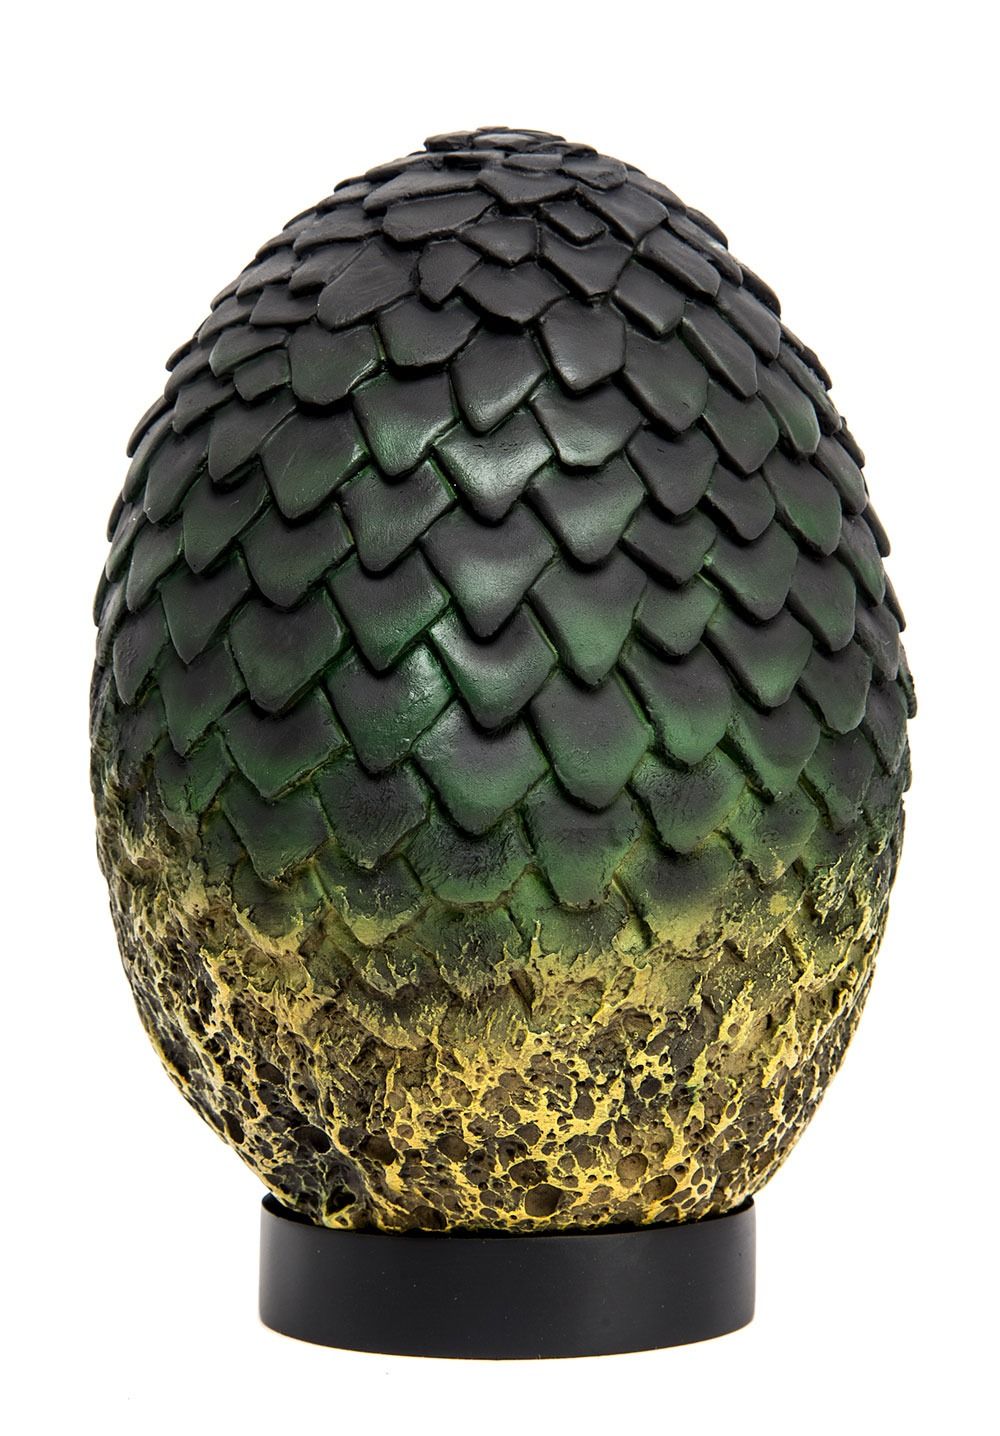 Game of Thrones: The Green Shall Be... Rhaegal Dragon Egg Prop Replica - Merchoid